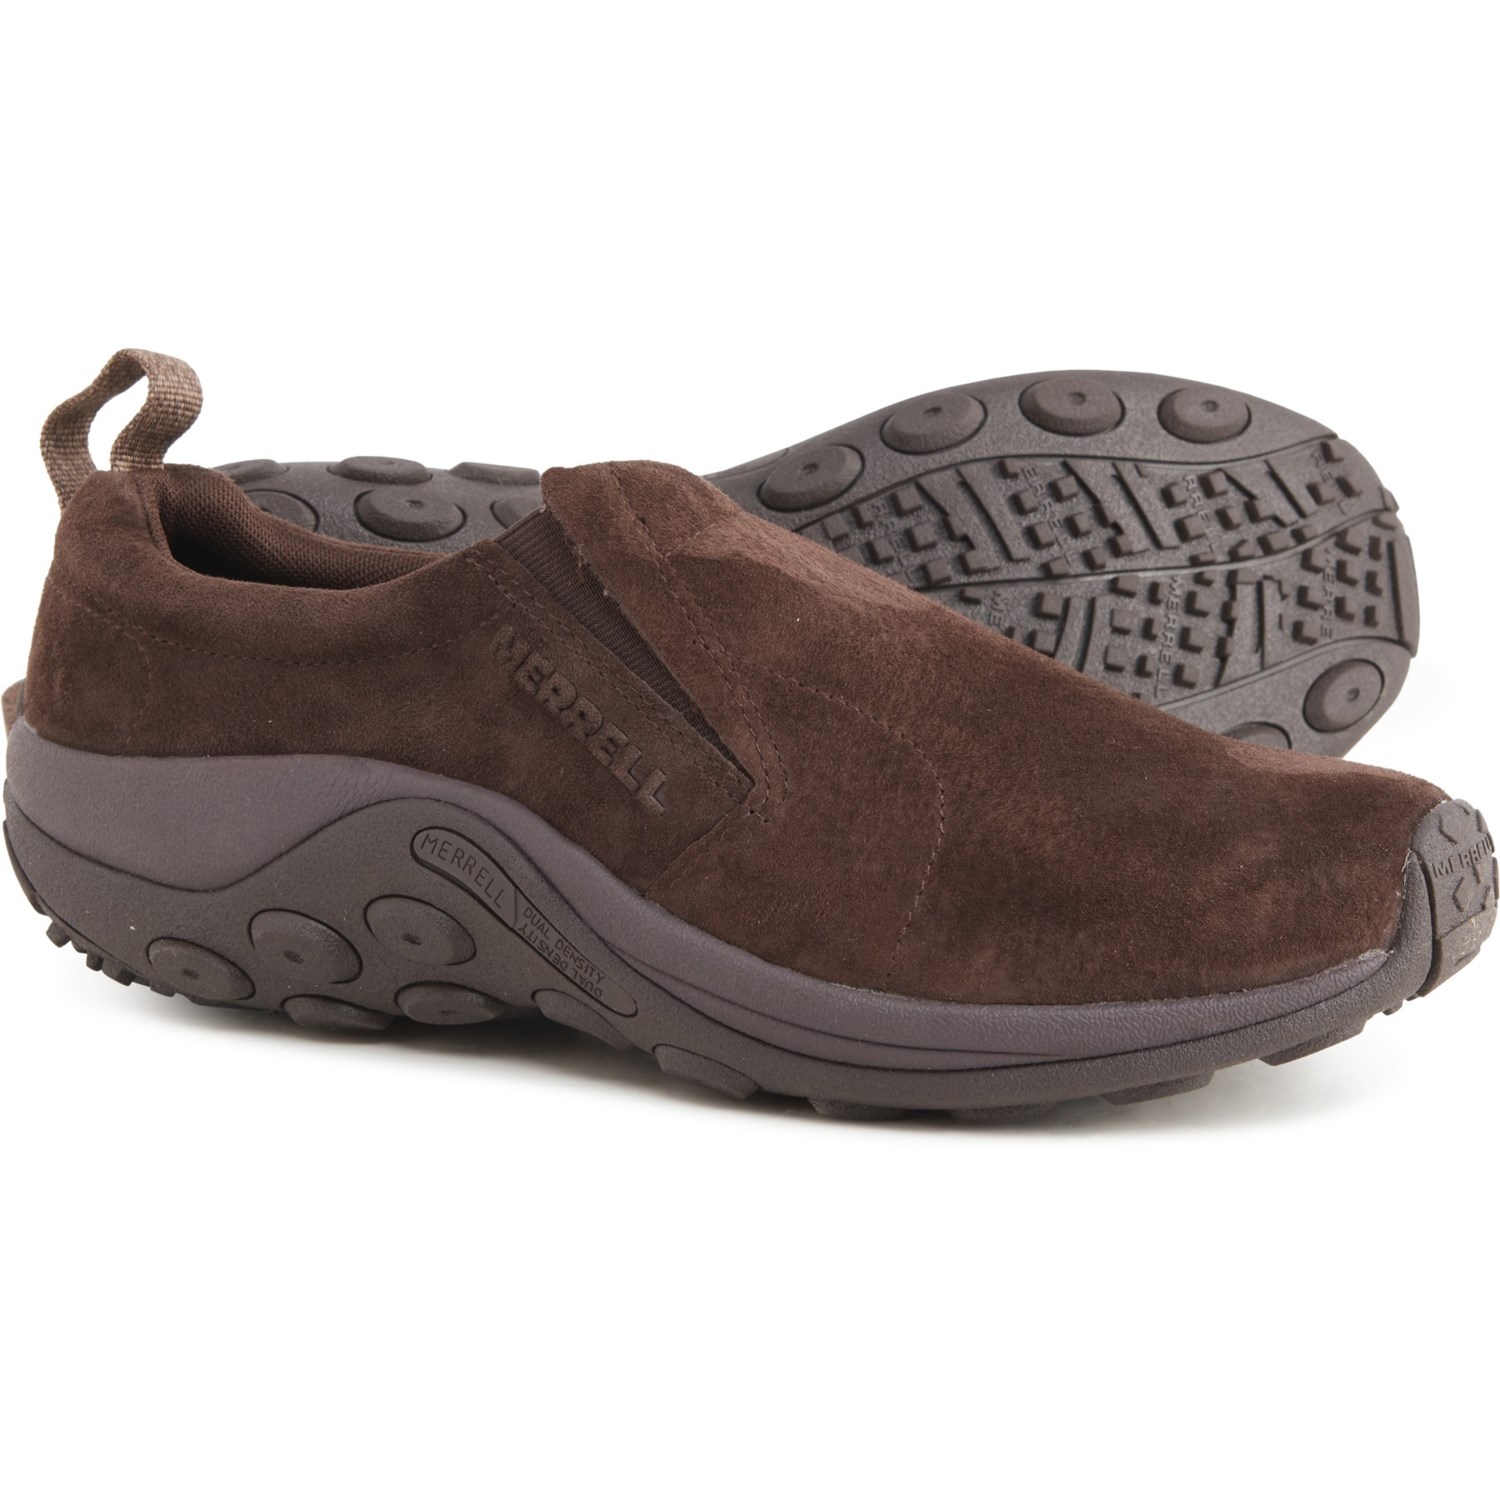 Merrell Moc Rinse Shoes (For Men) - Save 28%